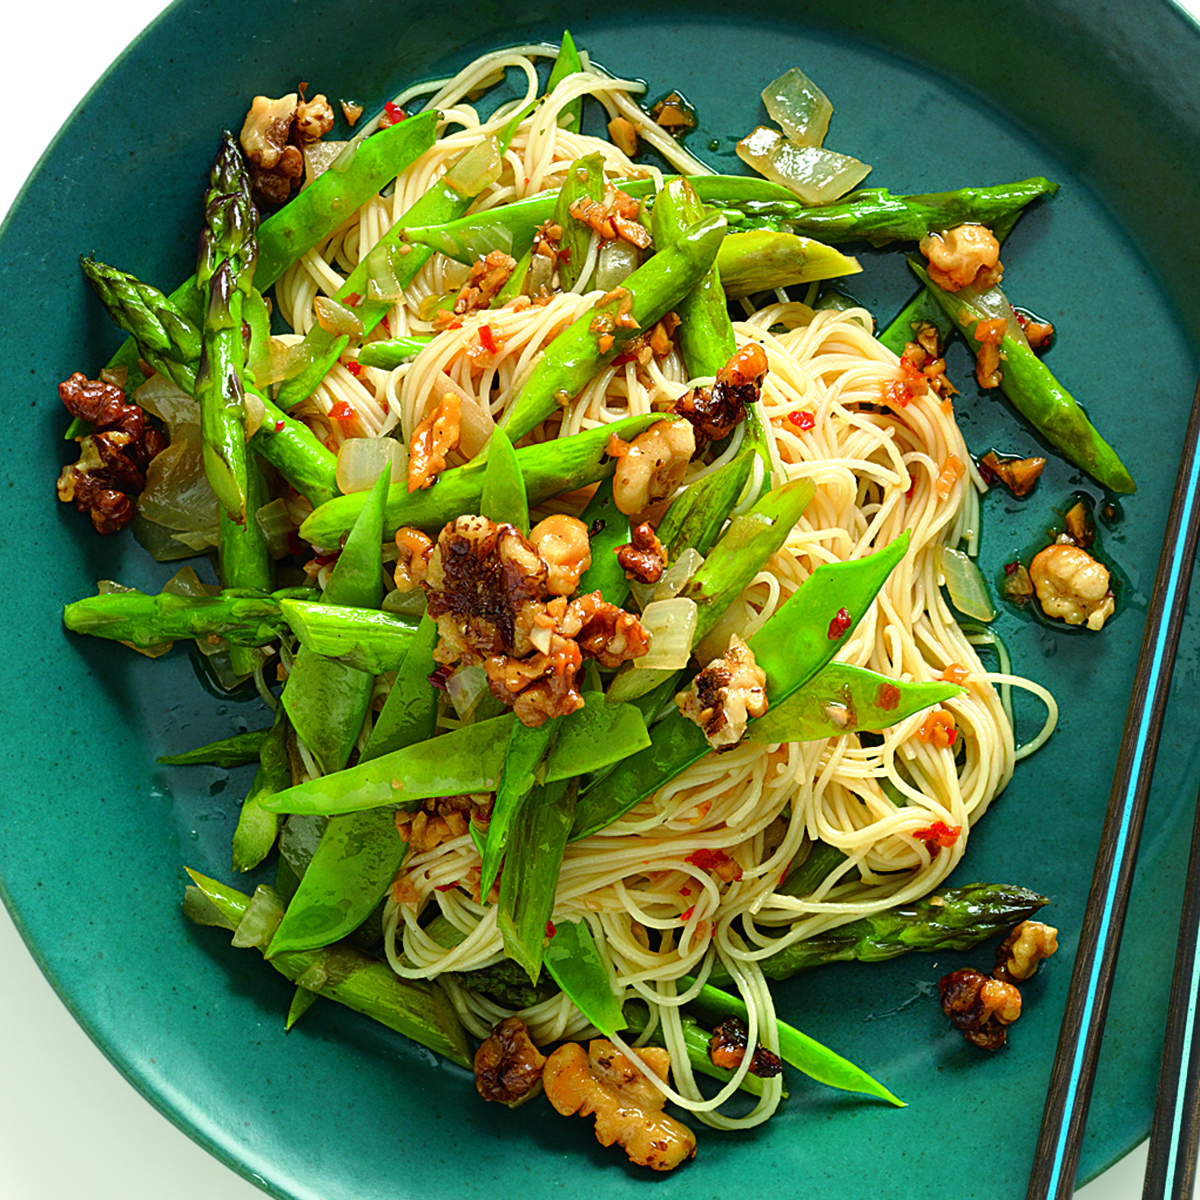 Spring Noodle Stir-Fry with Asparagus and Walnuts